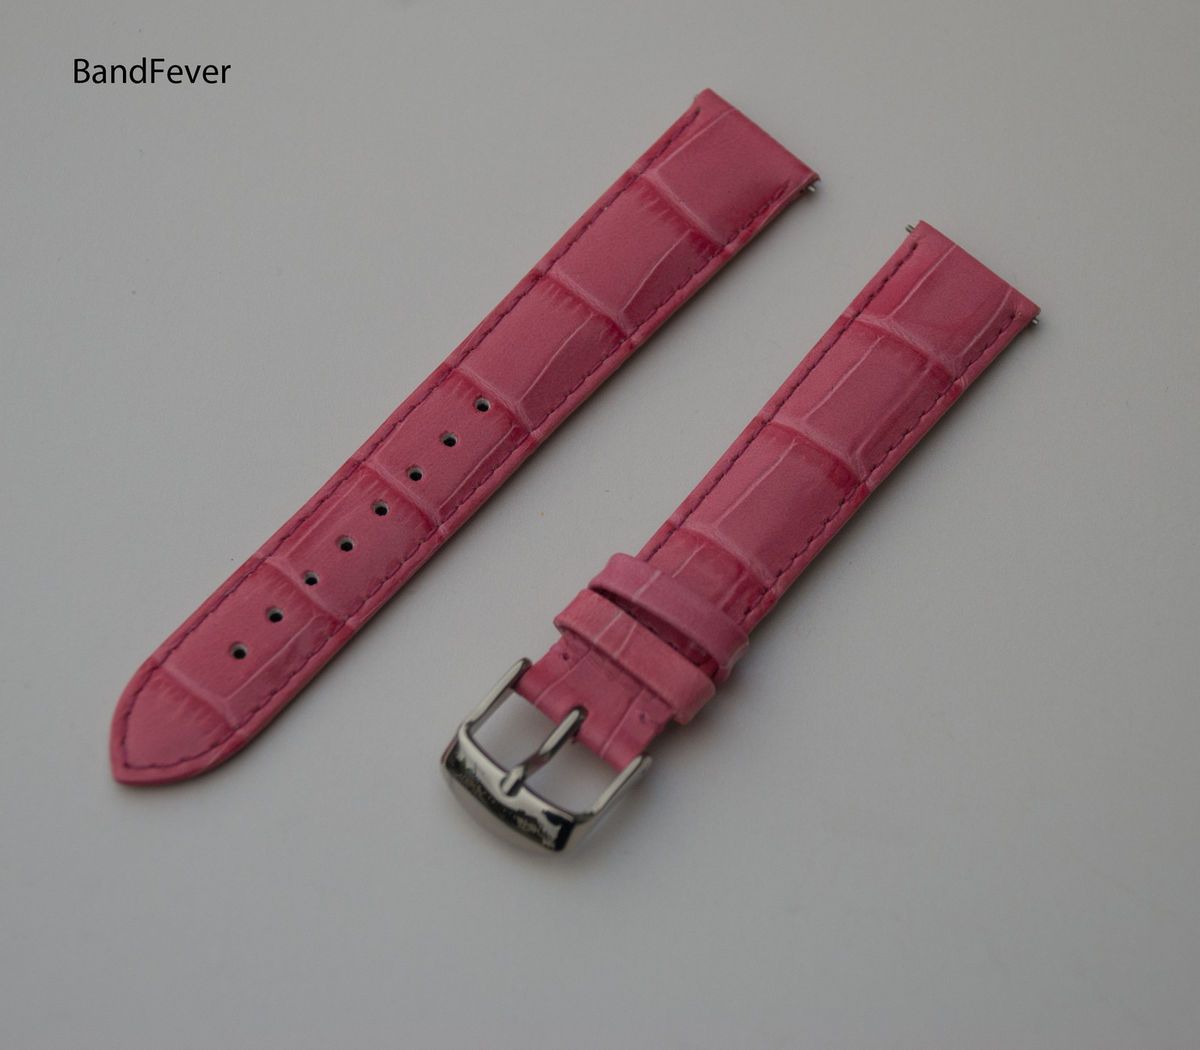  LIGHT PINK PEACH COMBINATION COLOR WATCH BAND STRAP FITS MICHELE ELINI